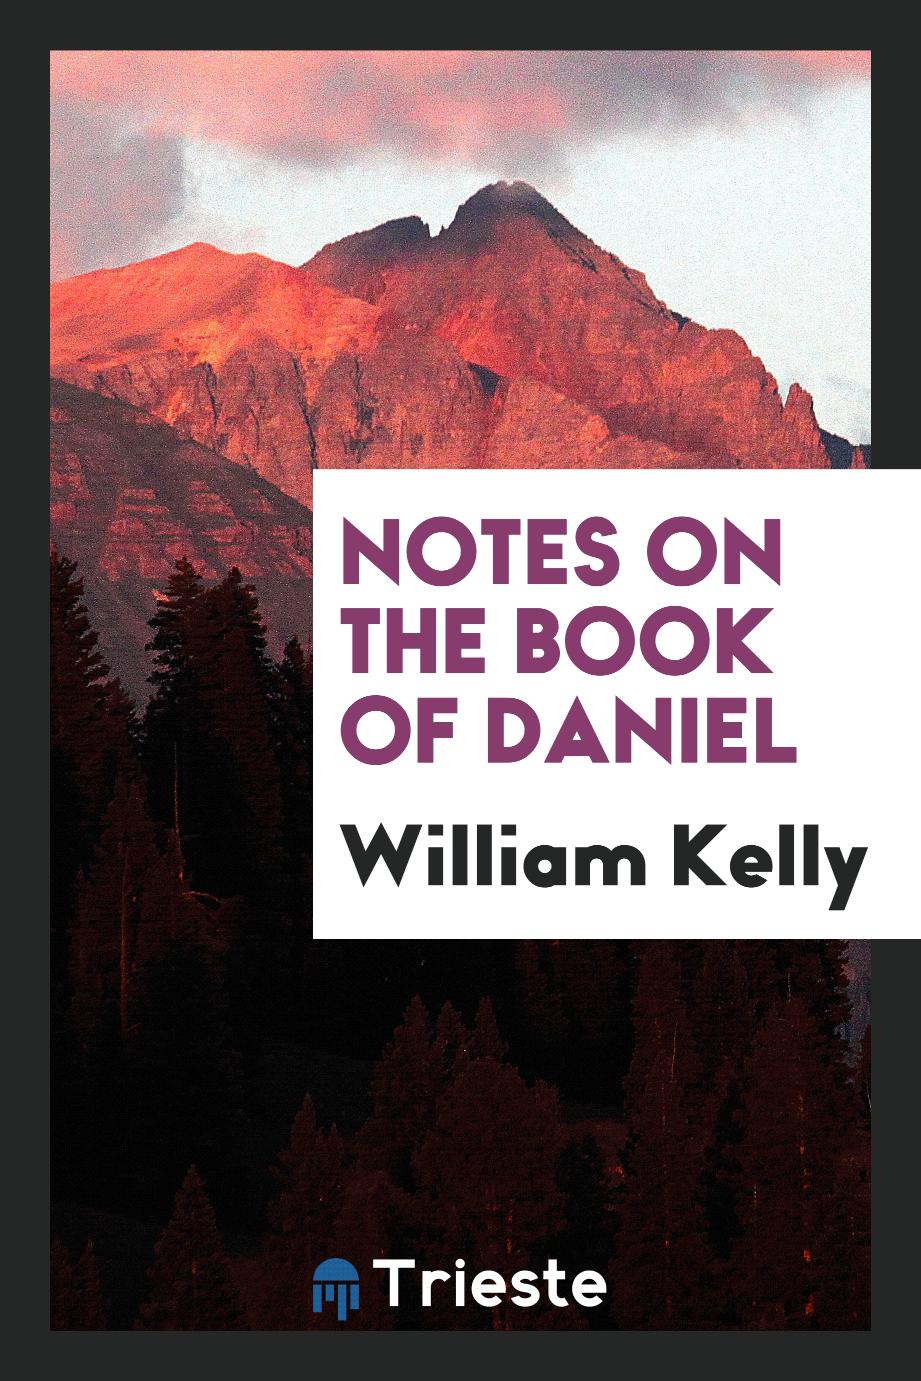 Notes on the book of Daniel